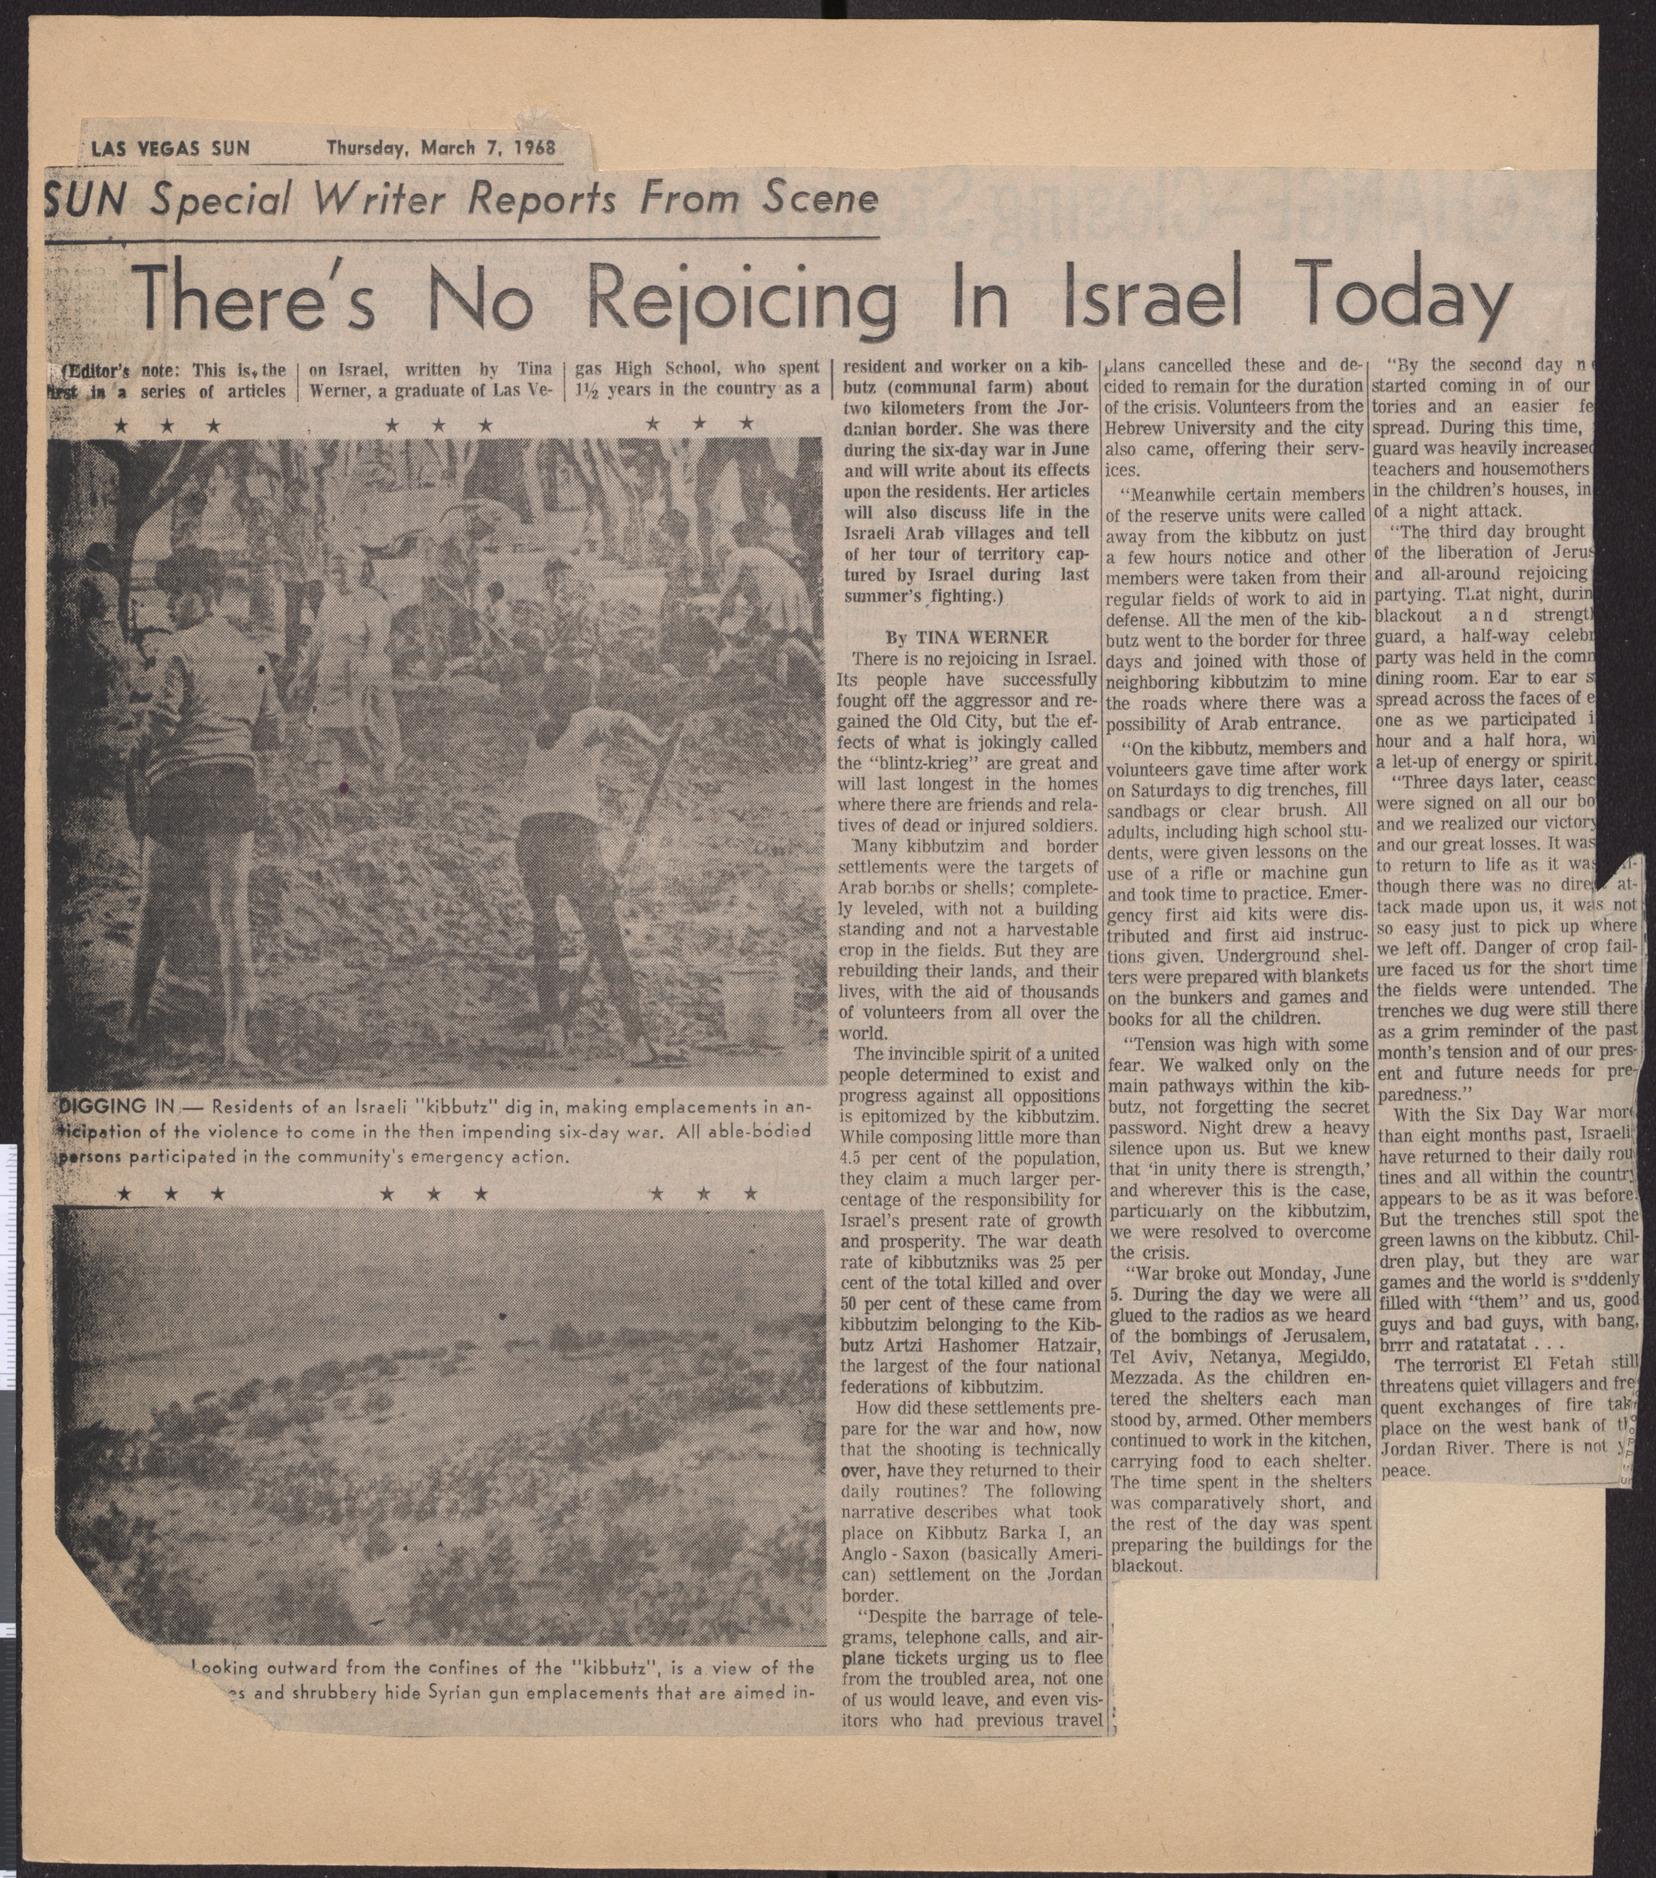 Newspaper clipping, There's No Rejoicing in Israel Today, Las Vegas Sun, March 7, 1968